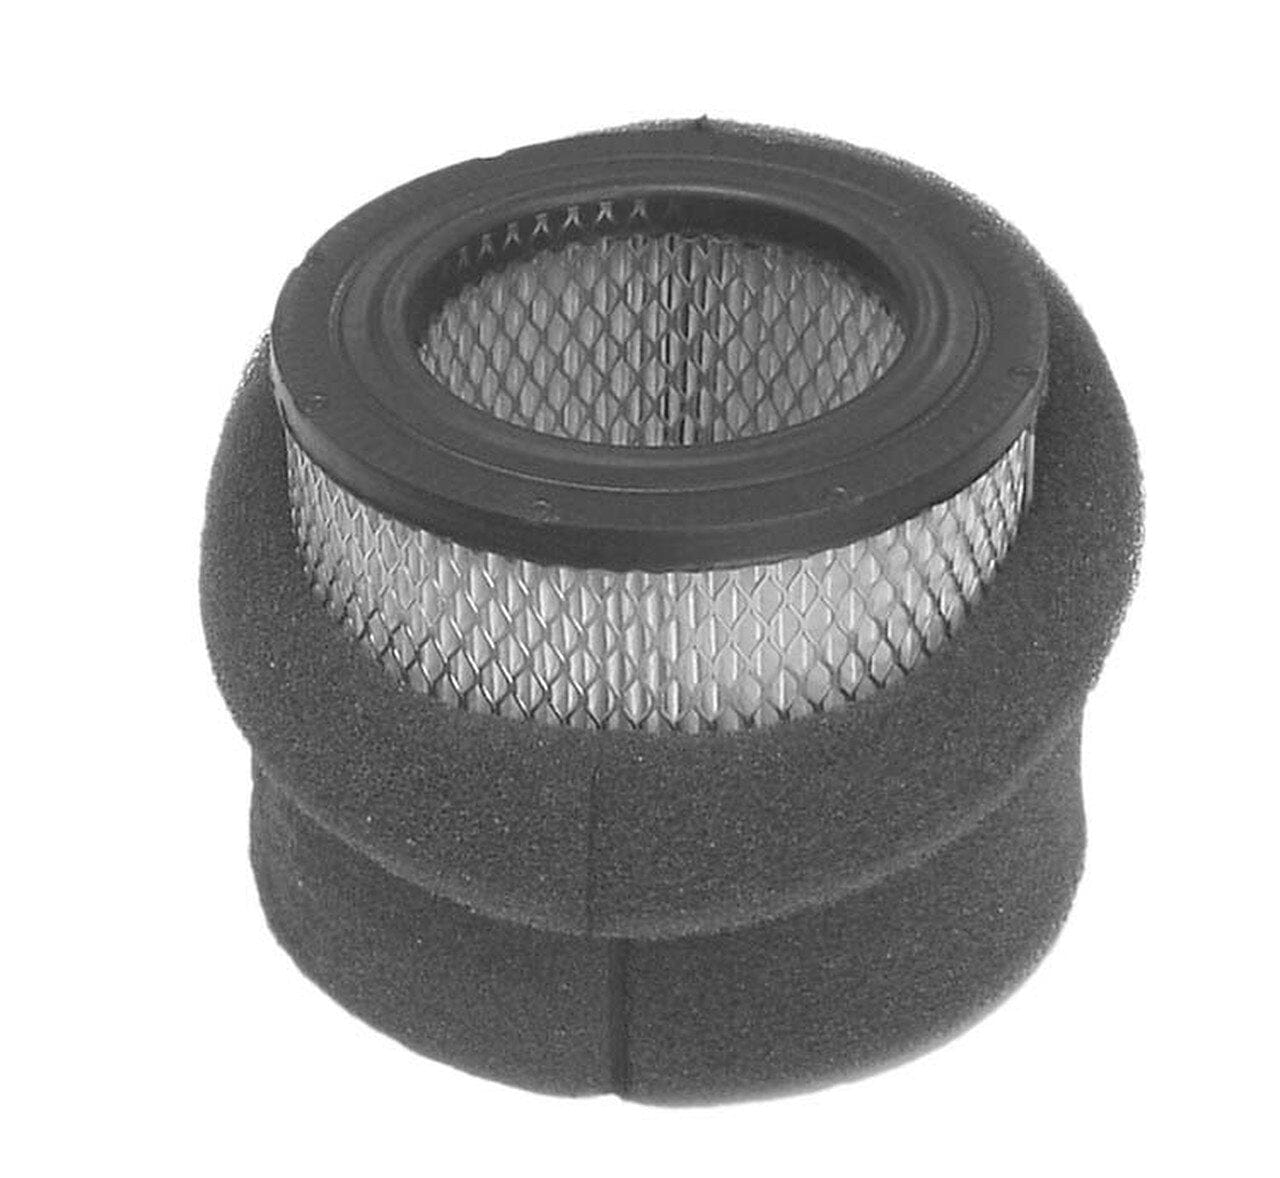 Gast Aerator System Parts Replacement Filter Cartridge for SOL3 Gast Blower Filter 1/8 HP to 5 HP Gast Blower Filter 1/8 HP to 5 HP - Smith Creek Fish Farm